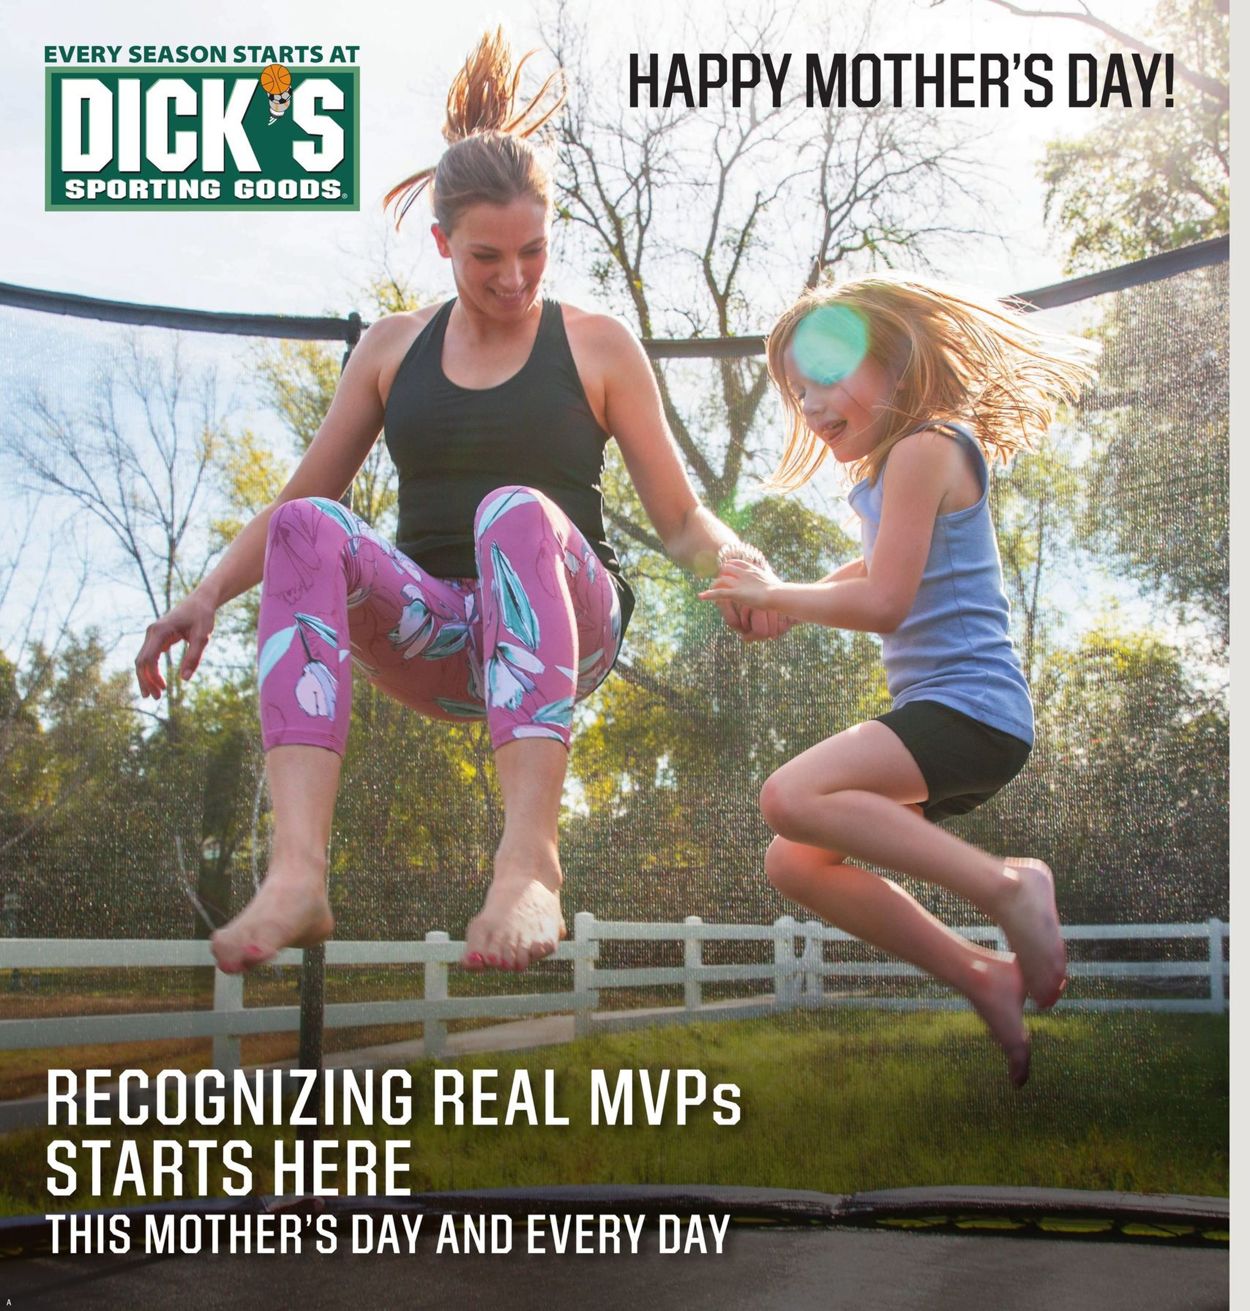 Dick's Ad from 05/12/2019